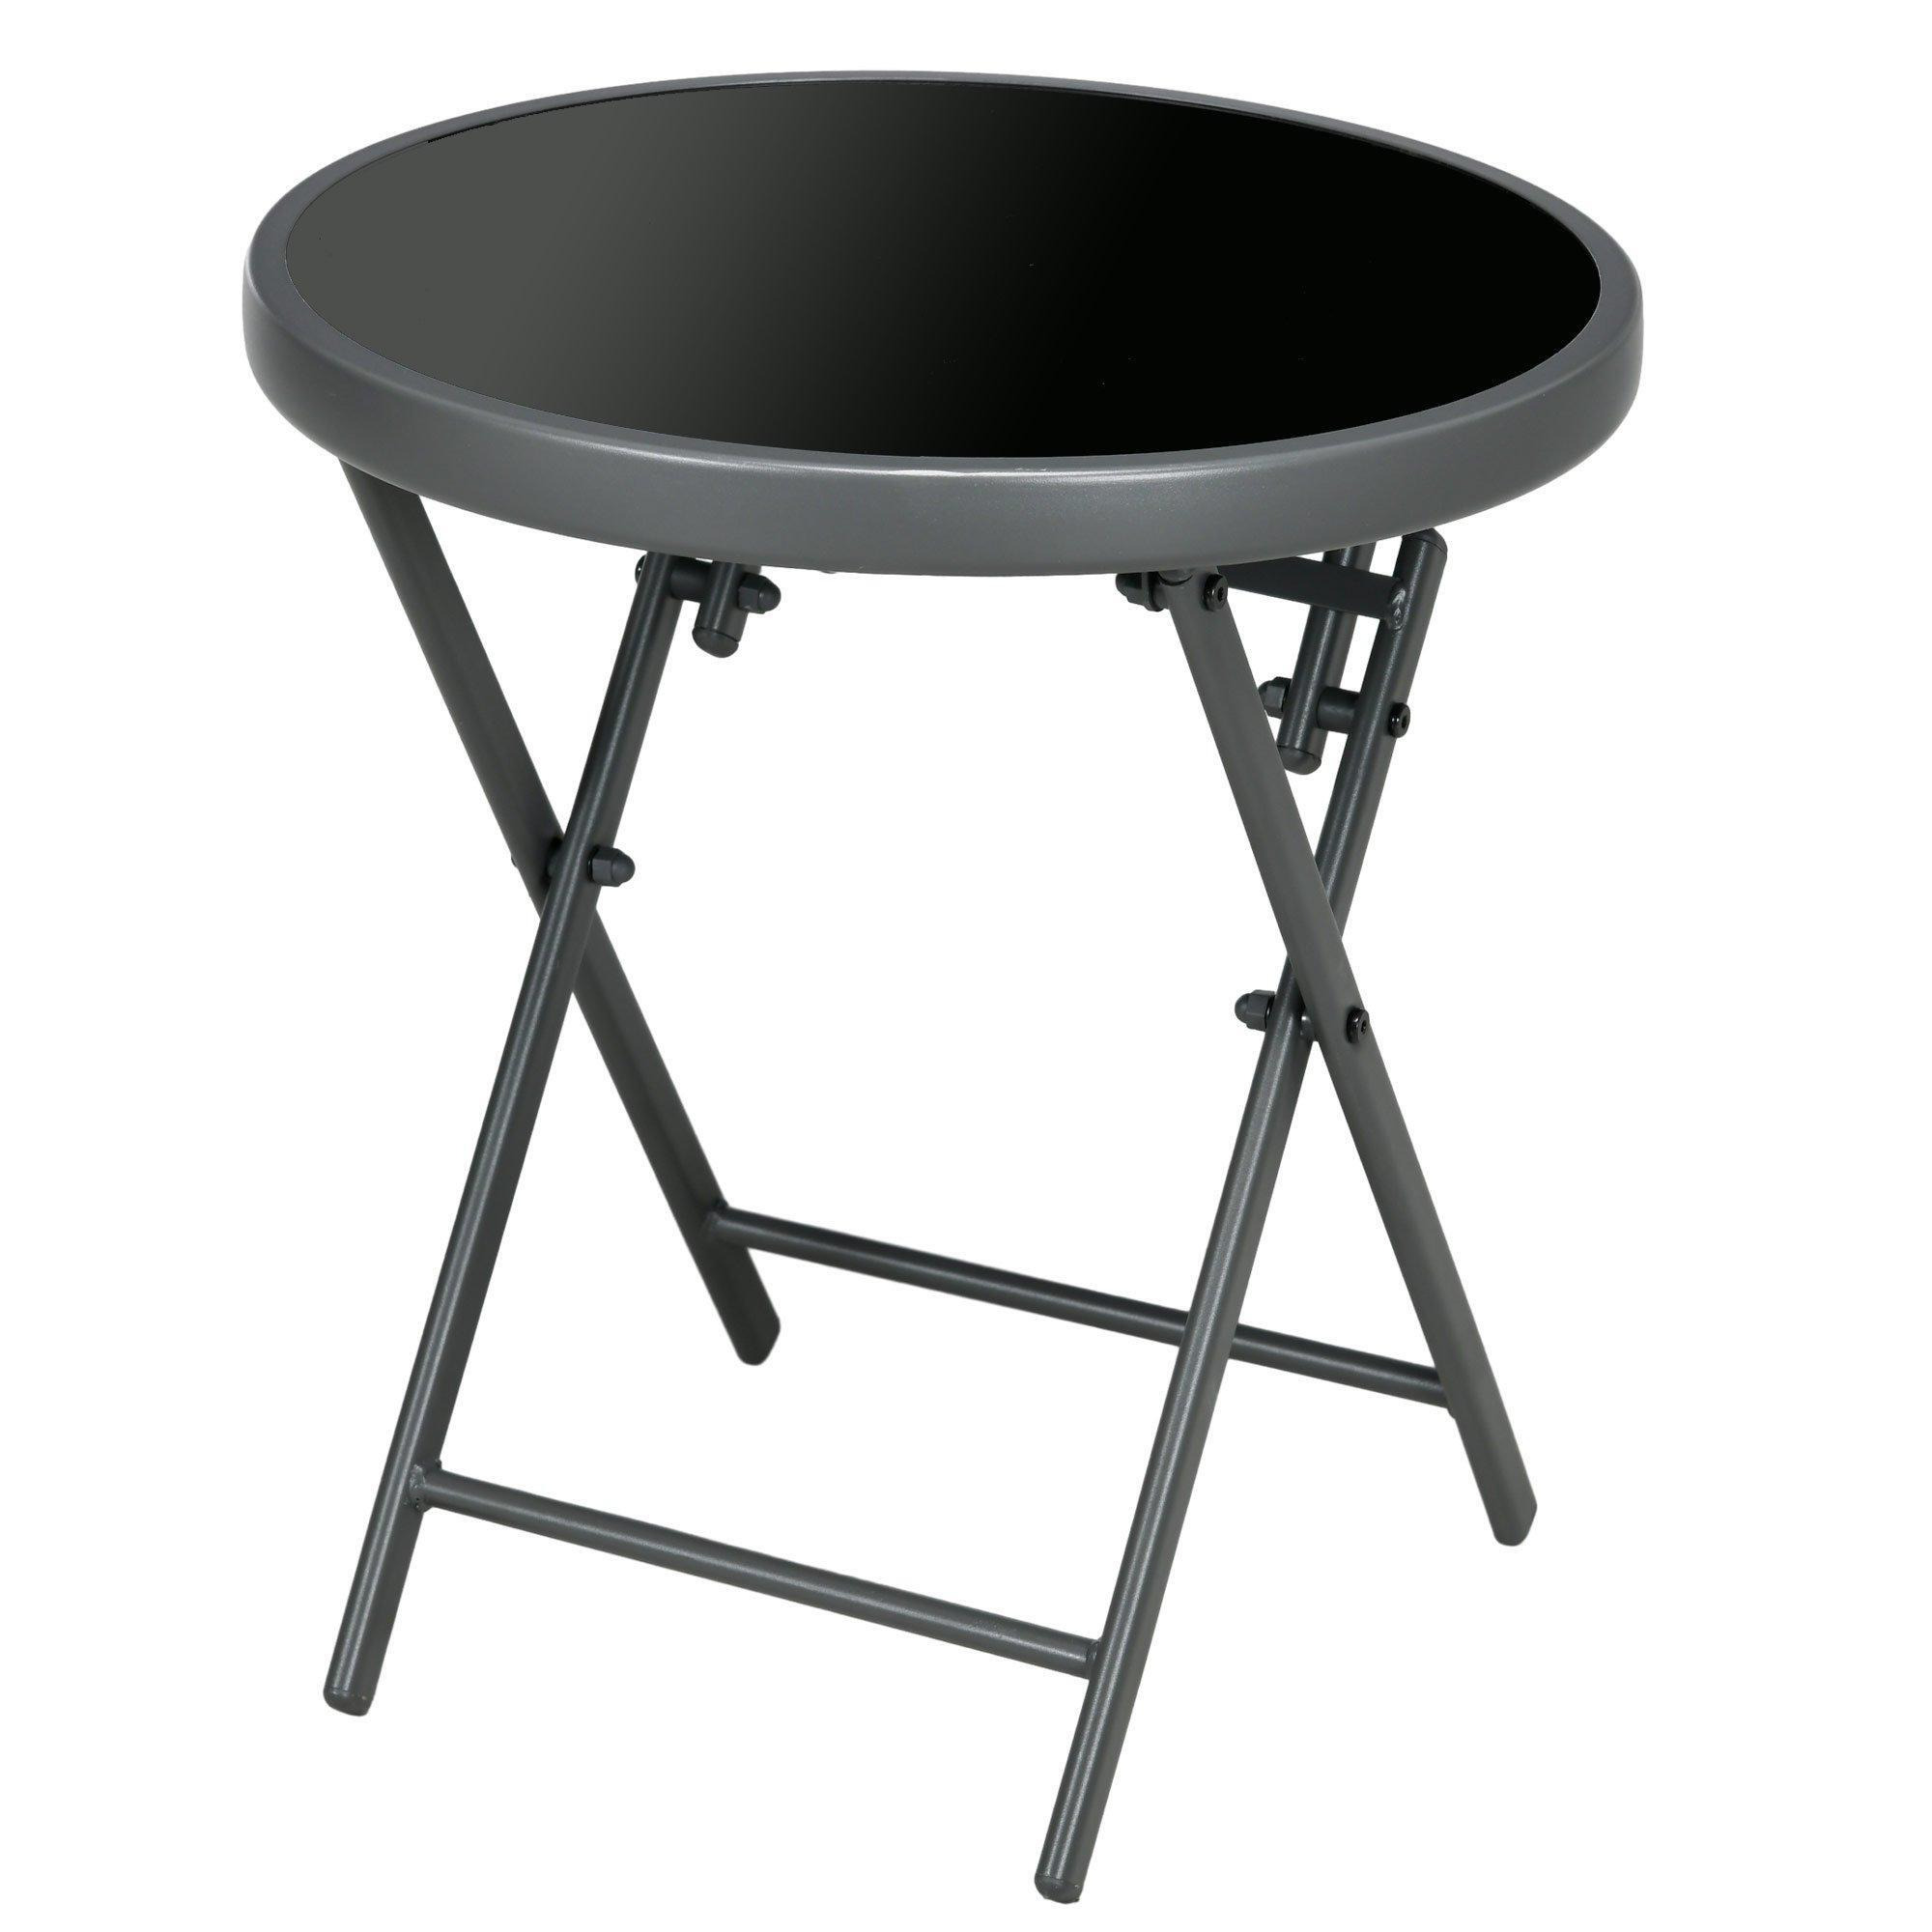 Round Folding Side Table Patio Table w/ Imitation Marble Glass Top - image 1